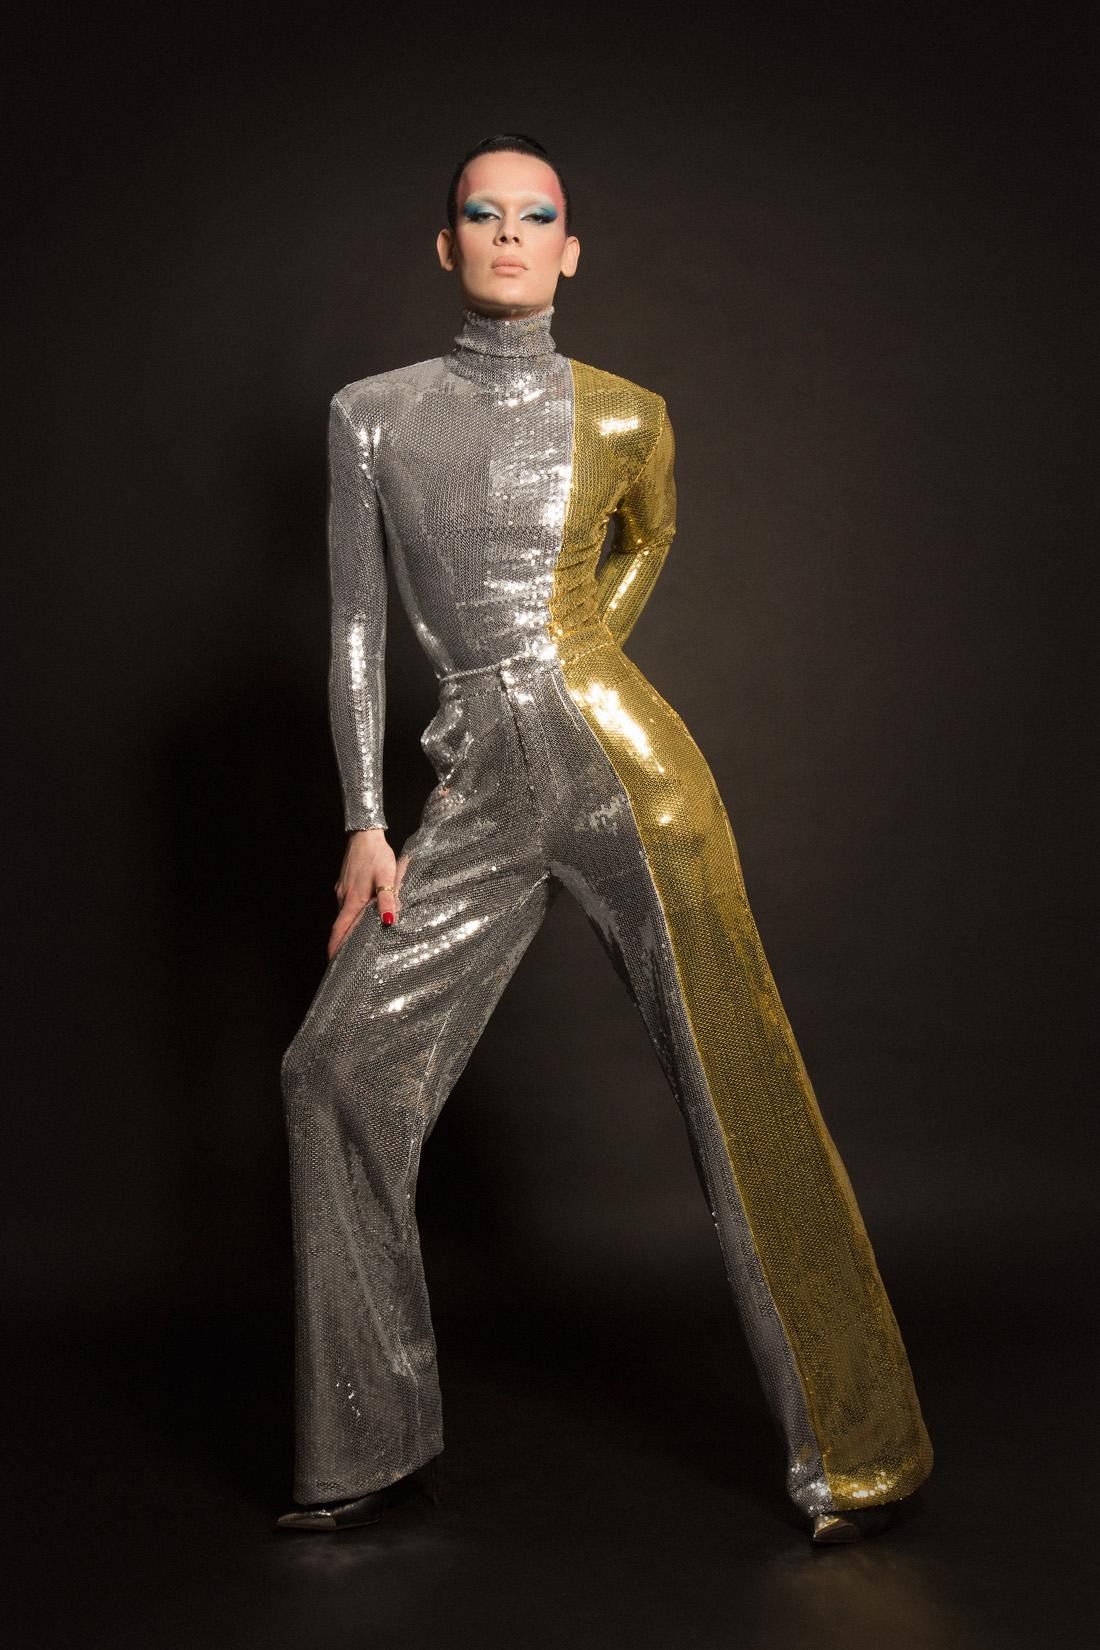 Cheng's Fall '18 Collection is the Lovechild of Anna May Wong & Marlene Dietrich